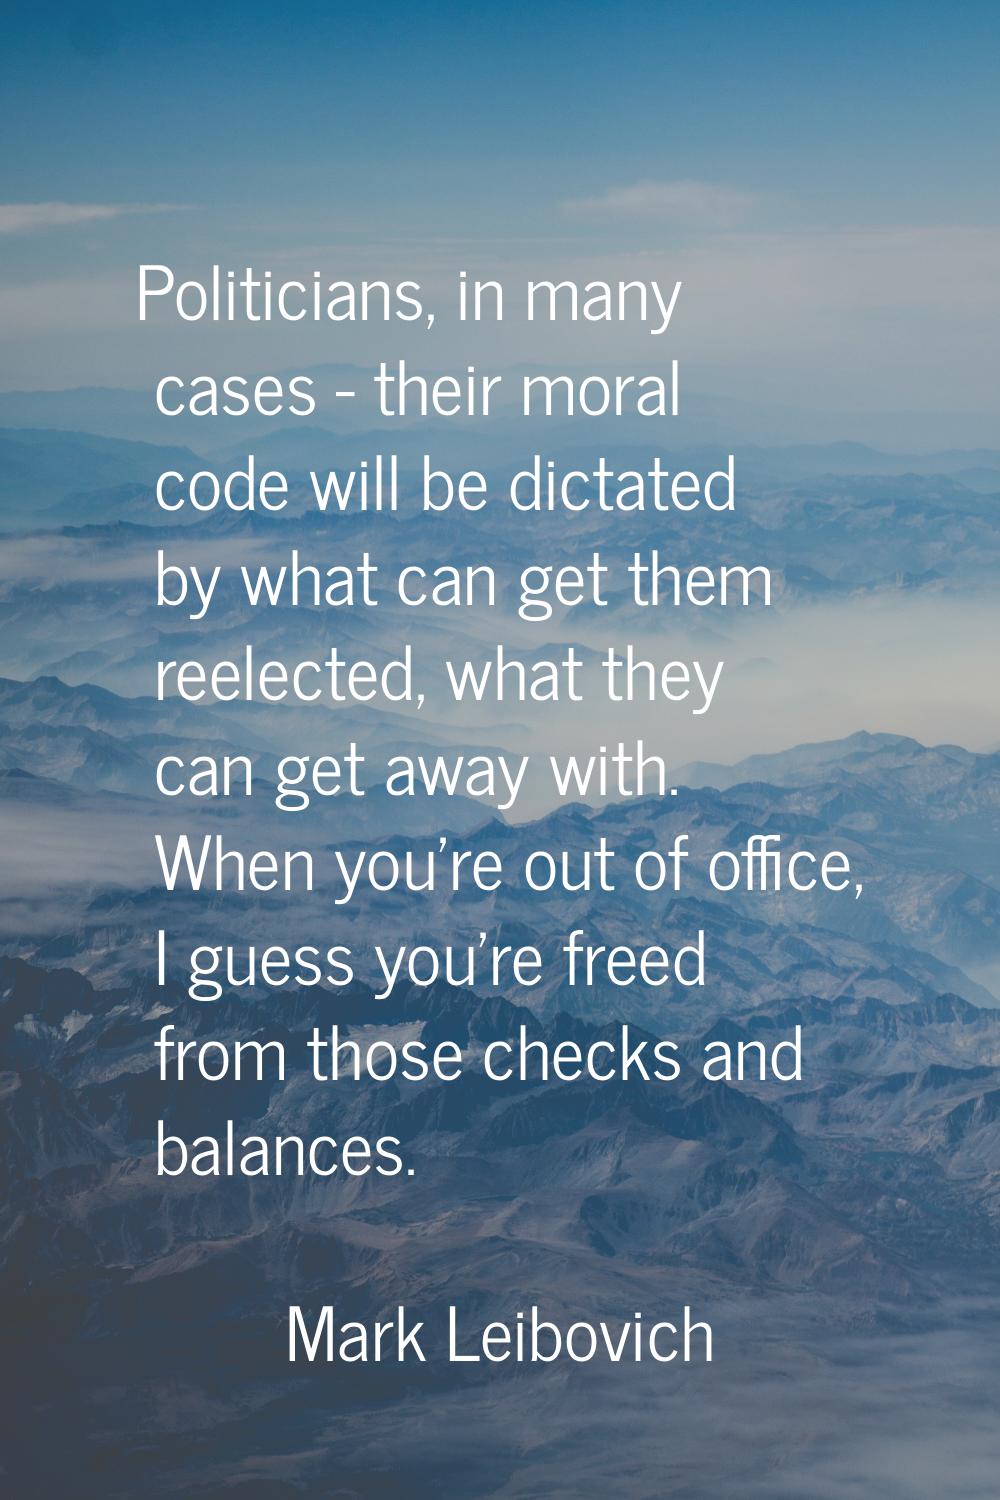 Politicians, in many cases - their moral code will be dictated by what can get them reelected, what